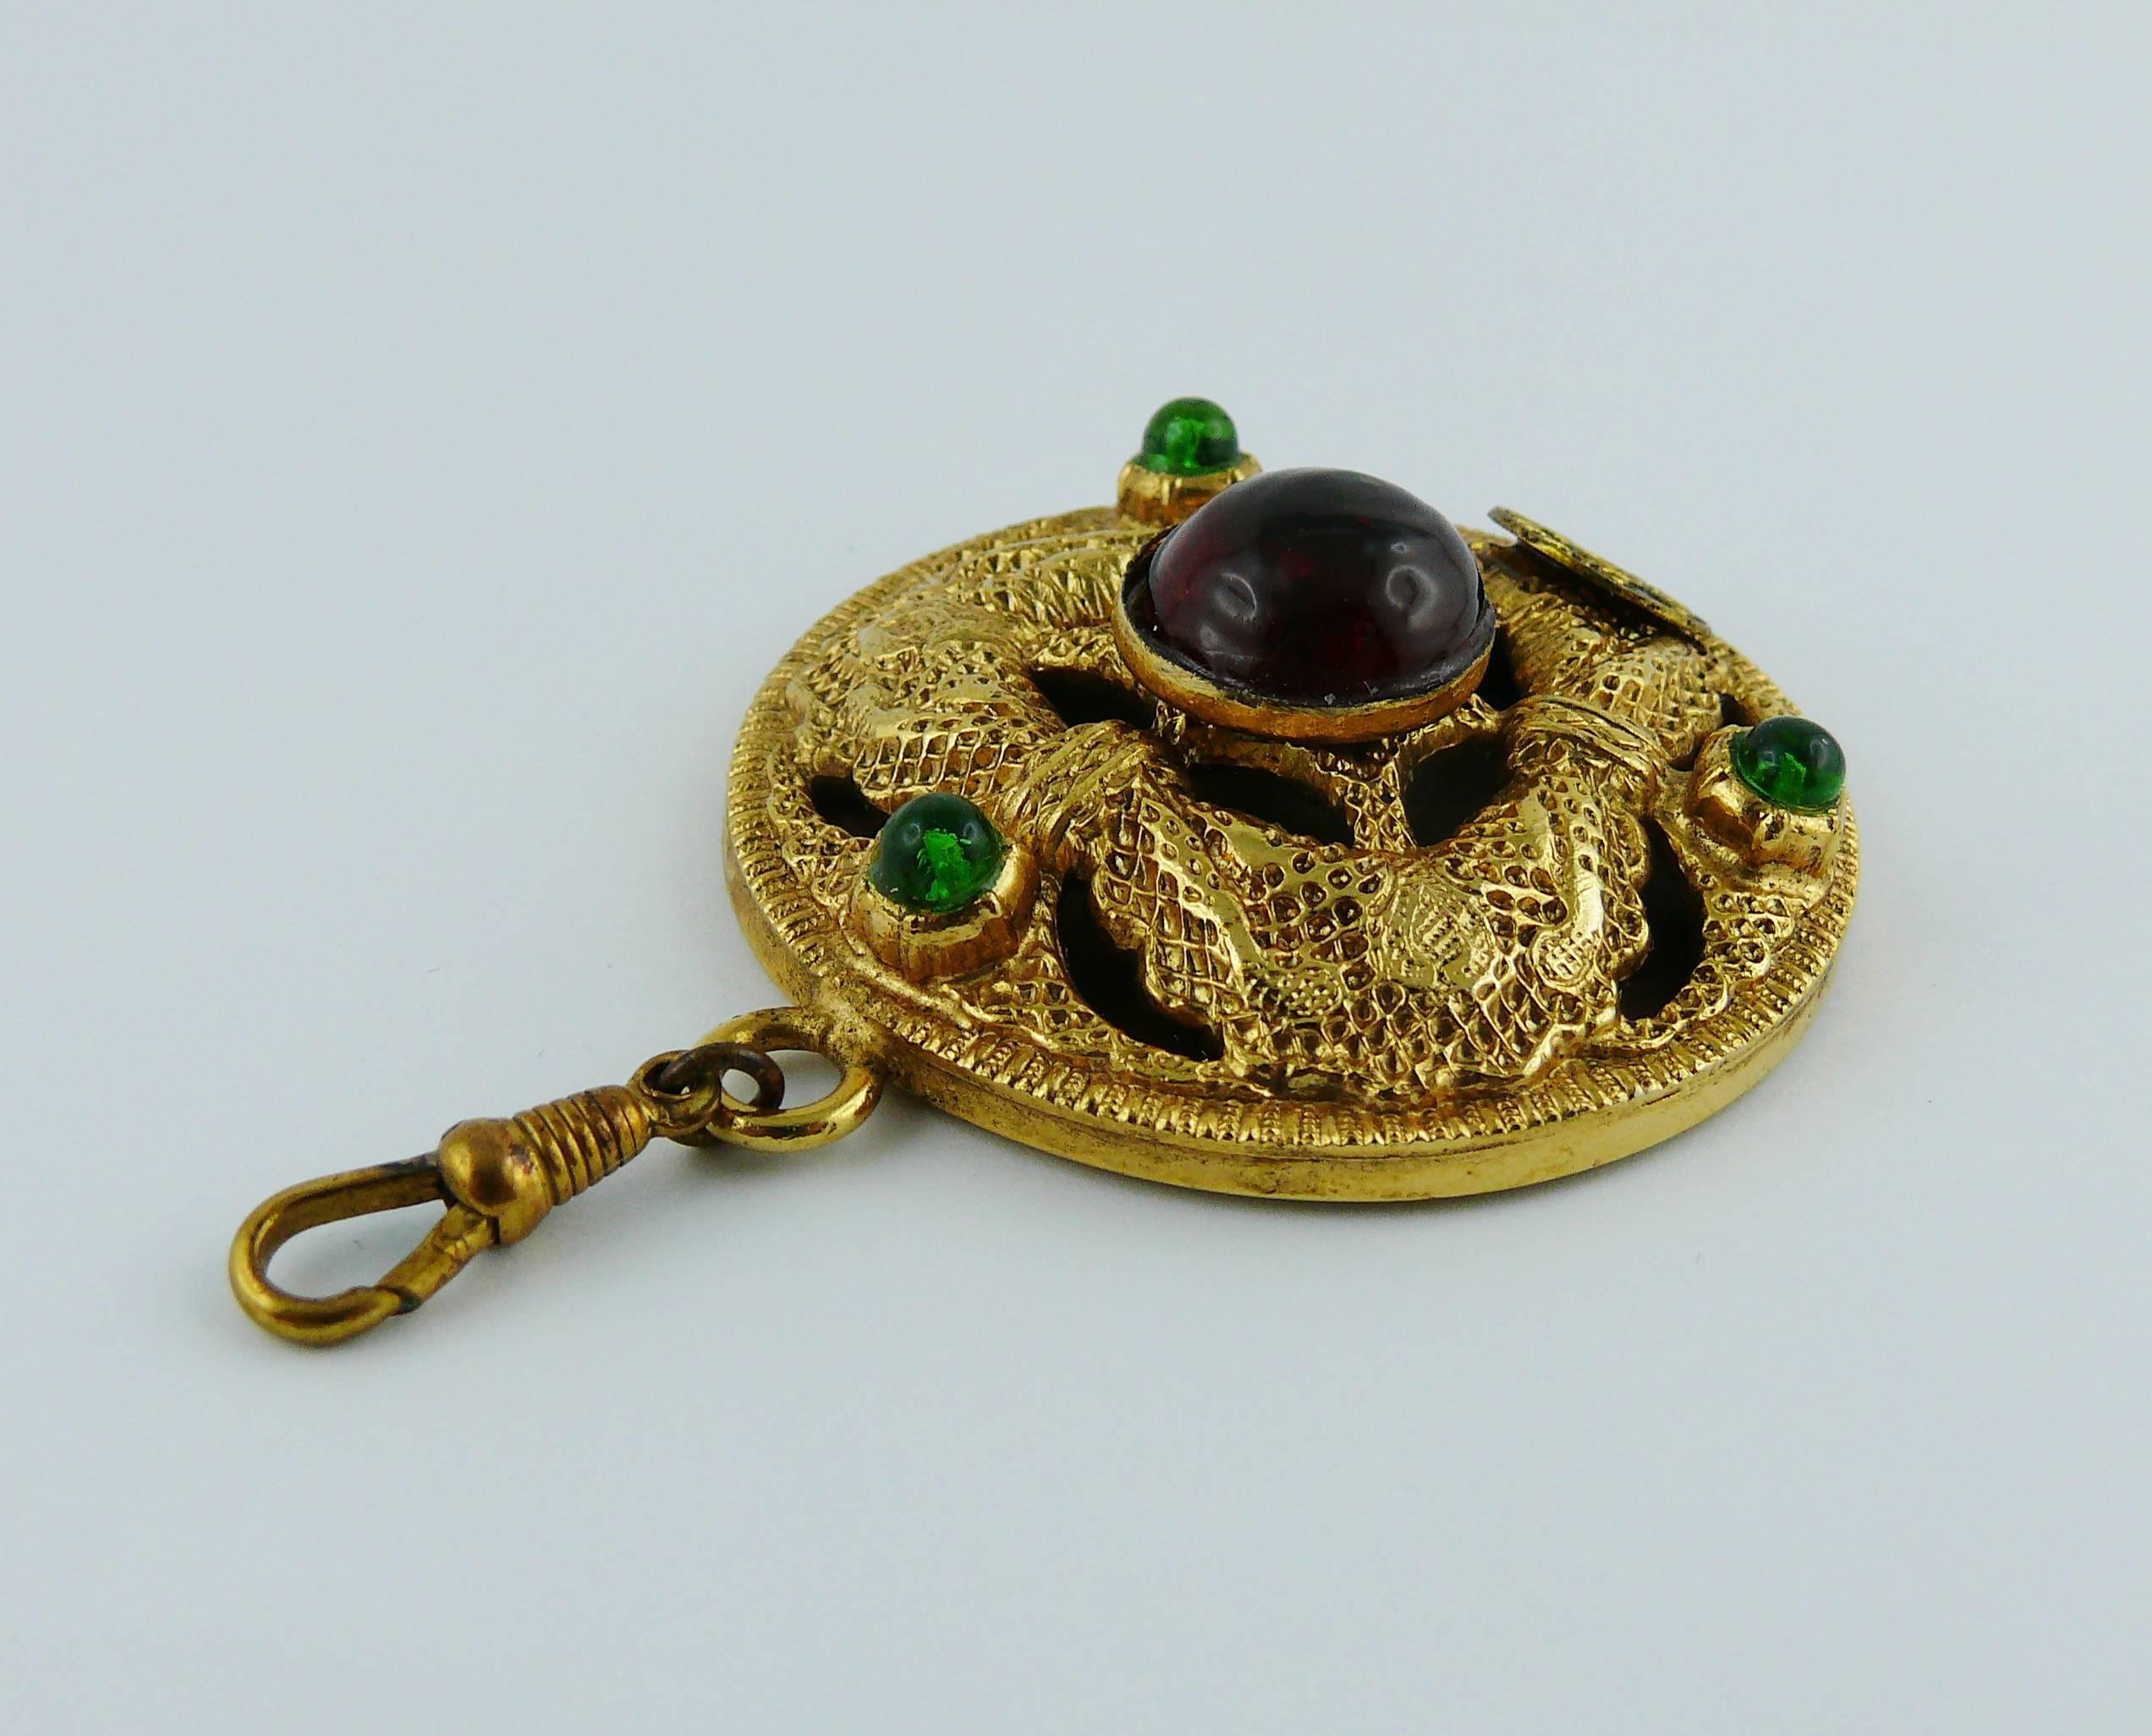 Chanel vintage rare 1984 round mirrored pendant.

Gold tone textured metal embellished with red and green gripoix glass cabochons on one side and mirror at the rear. 

Equipped with pinch clasp that attaches to a chain. 

Marked CHANEL 1984.

Comes